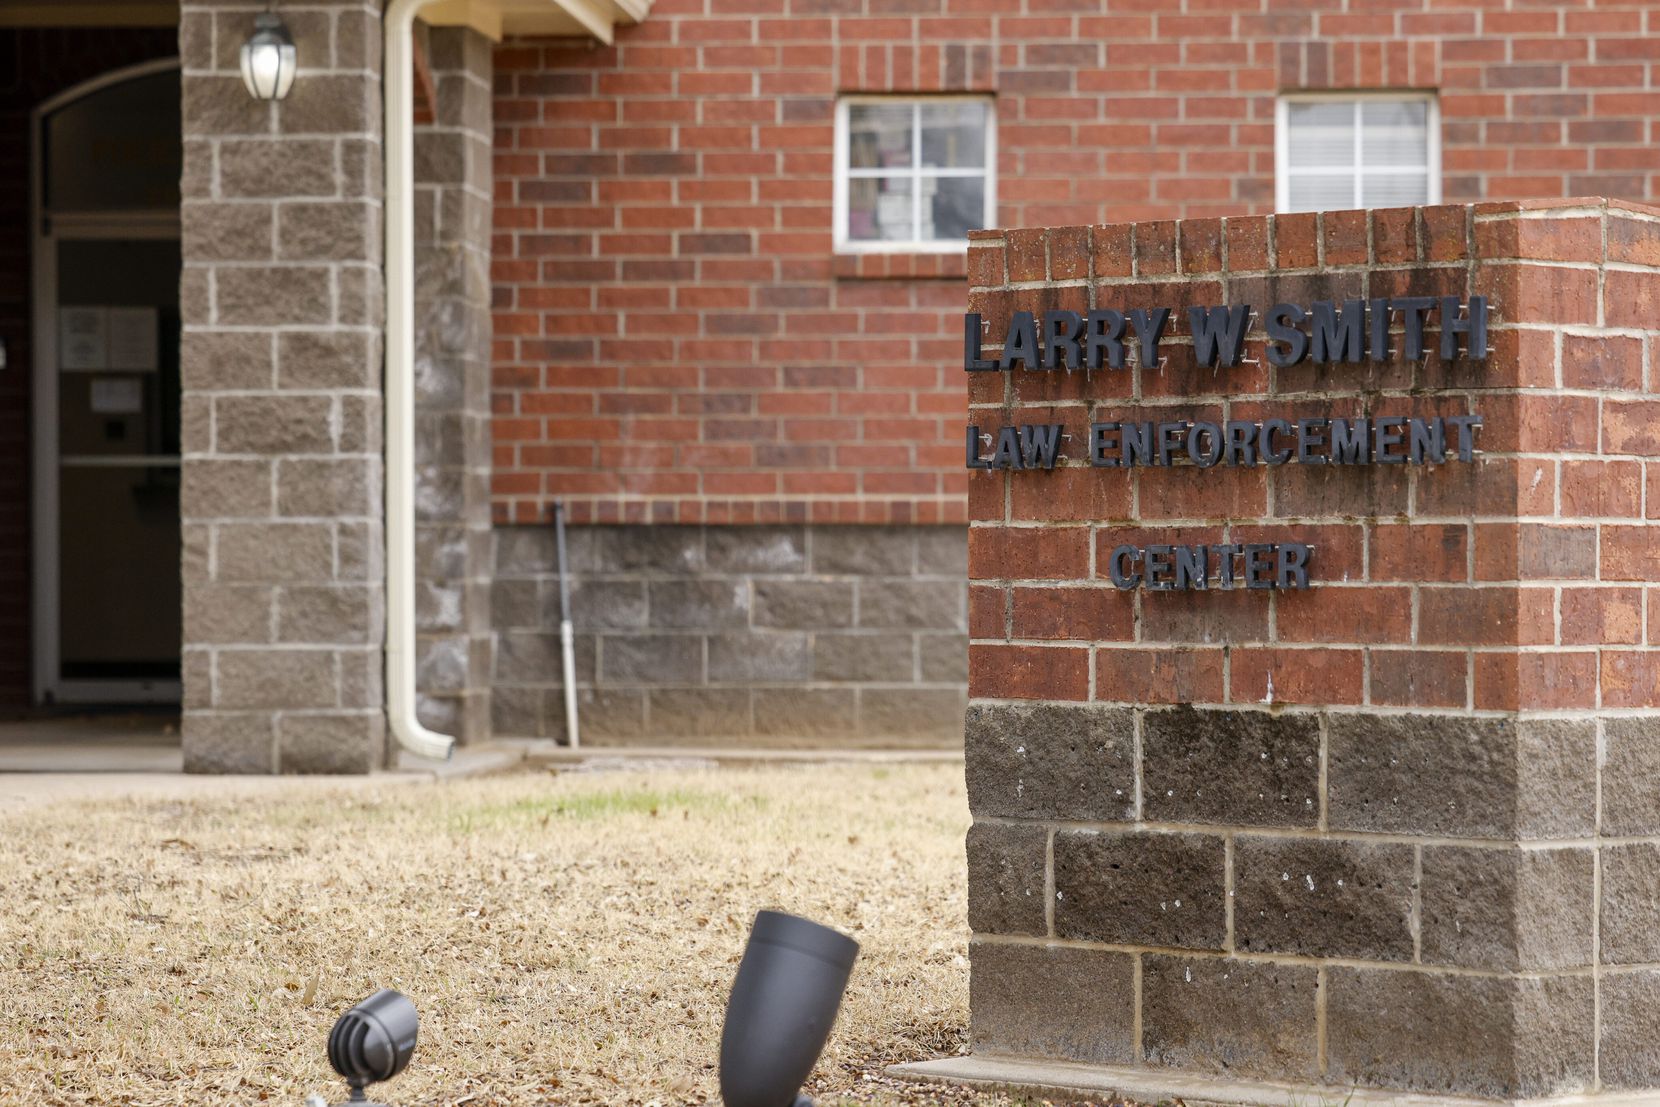 The Larry W. Smith Law Enforcement Center in Pantego, Texas, Wednesday, Jan. 25, 2023.